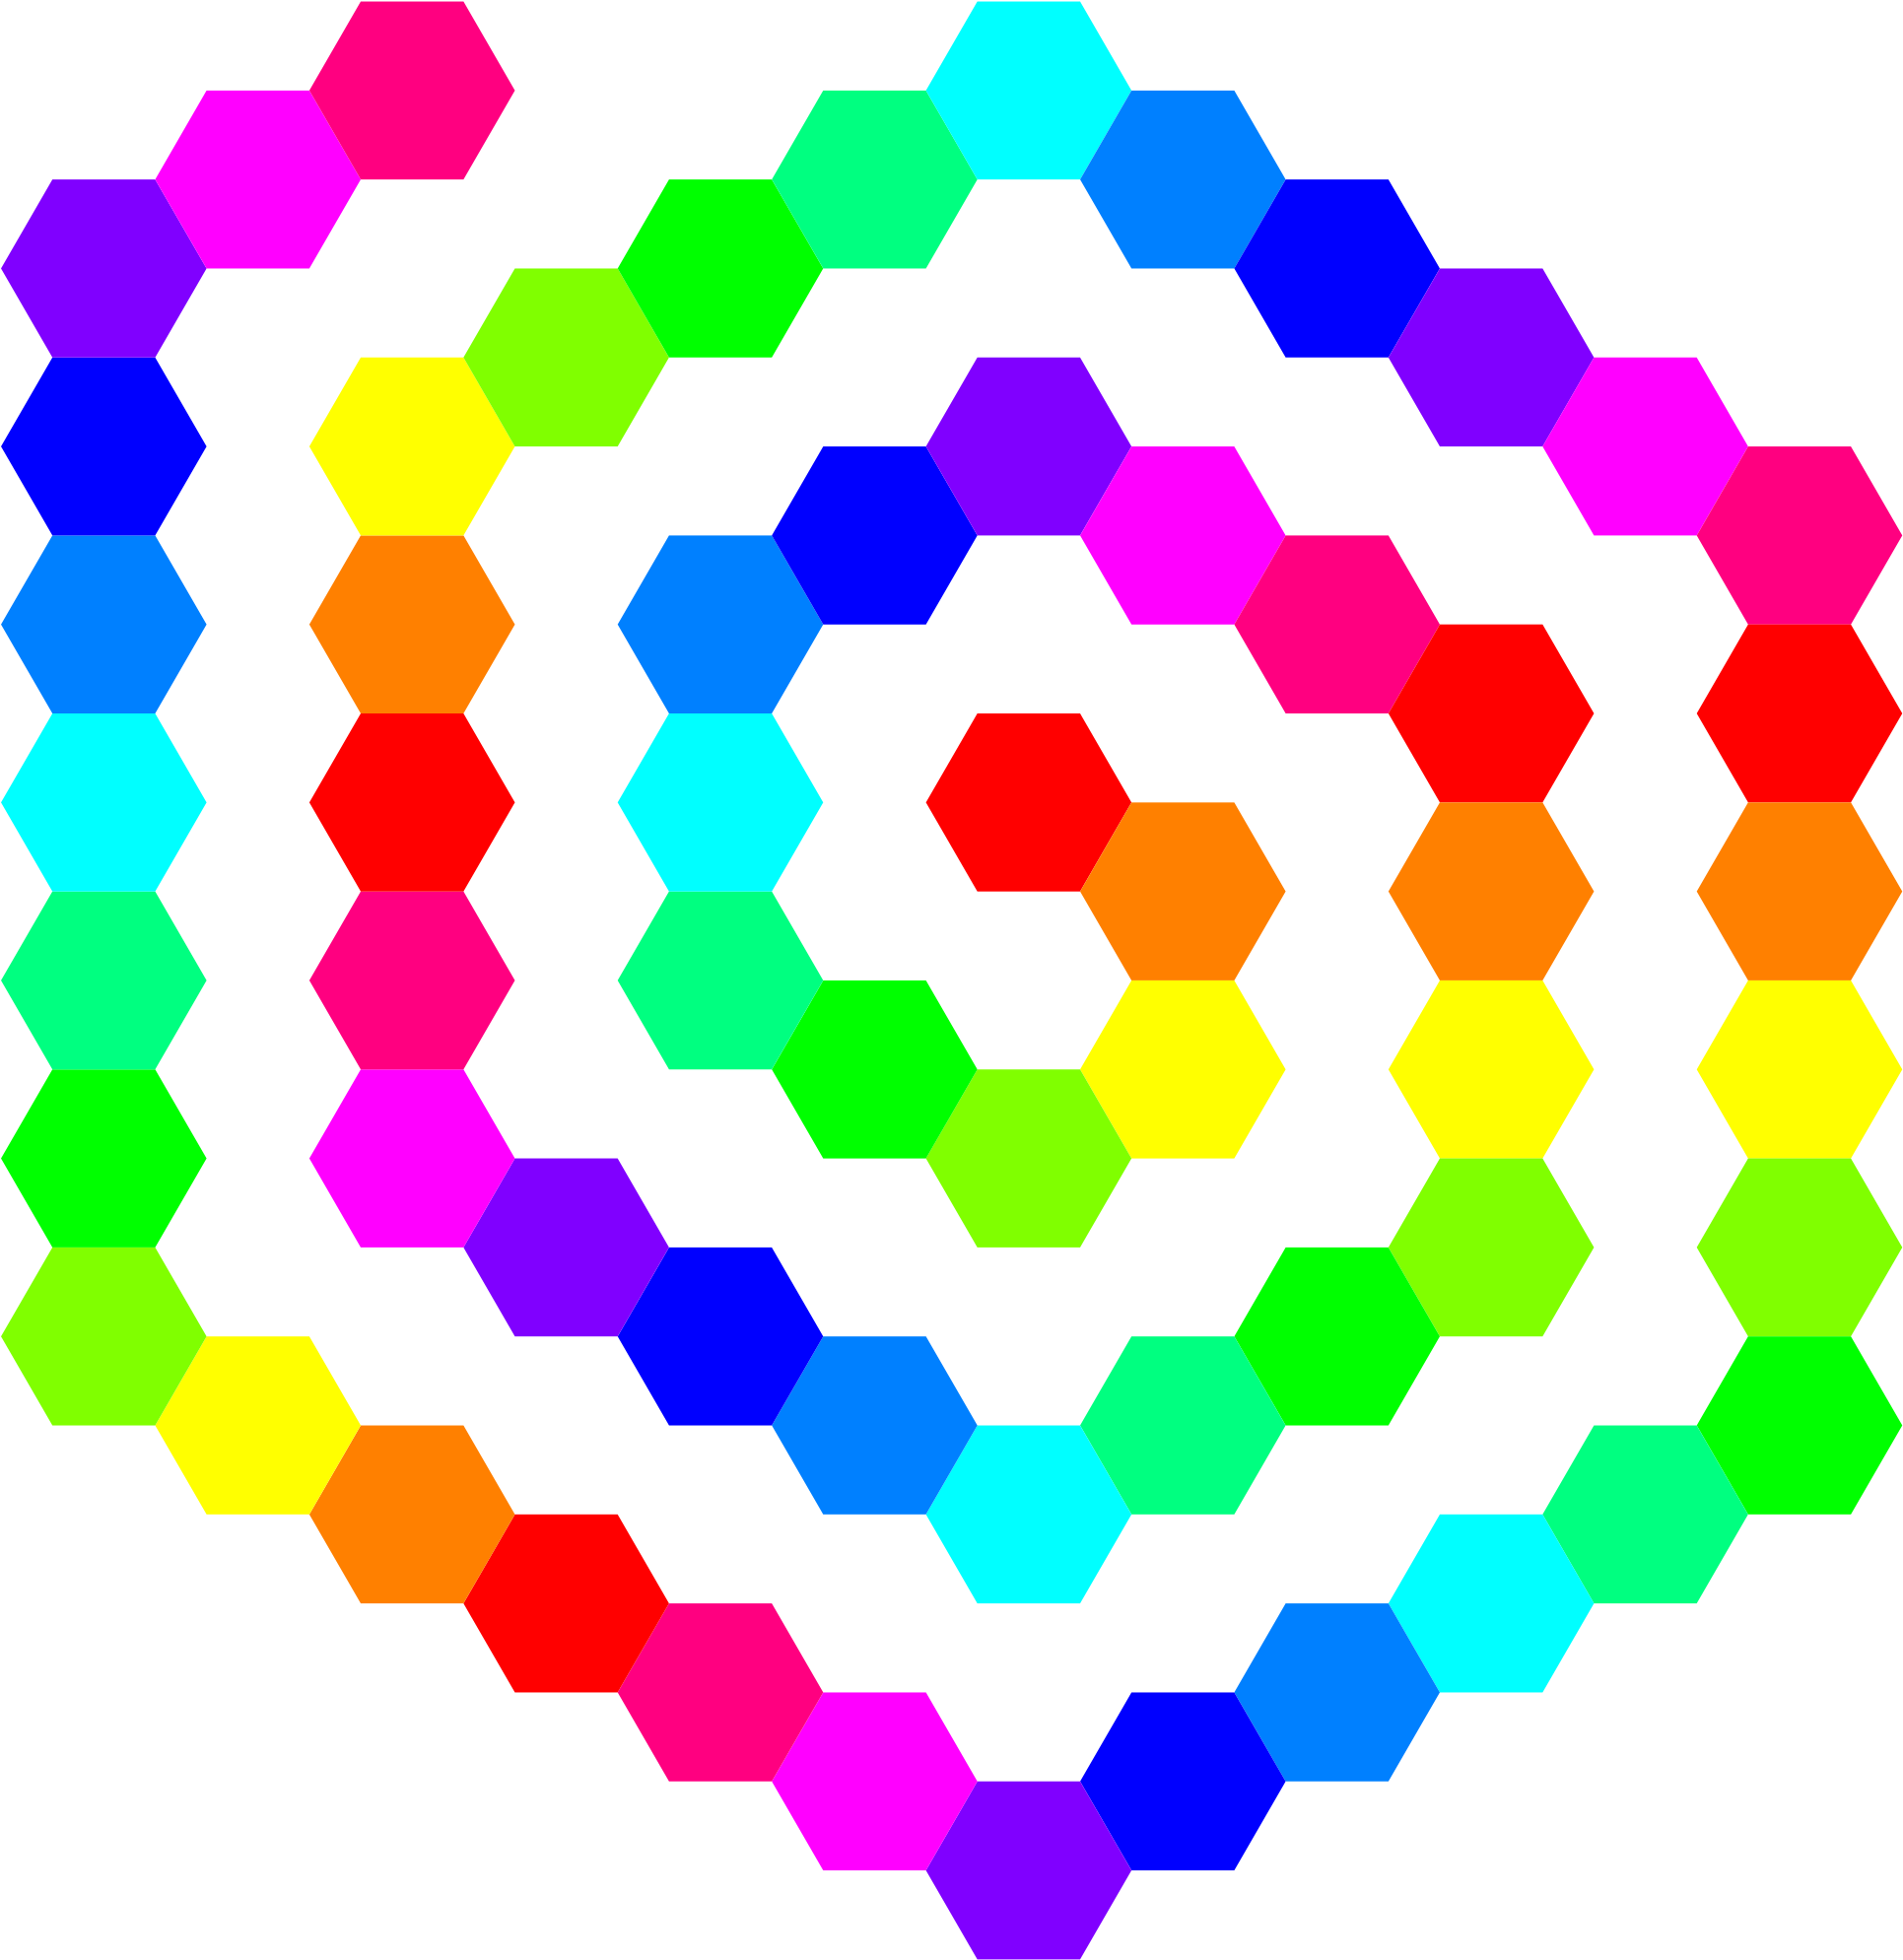 A Colorful Hexagons Spiraling In A Black Background